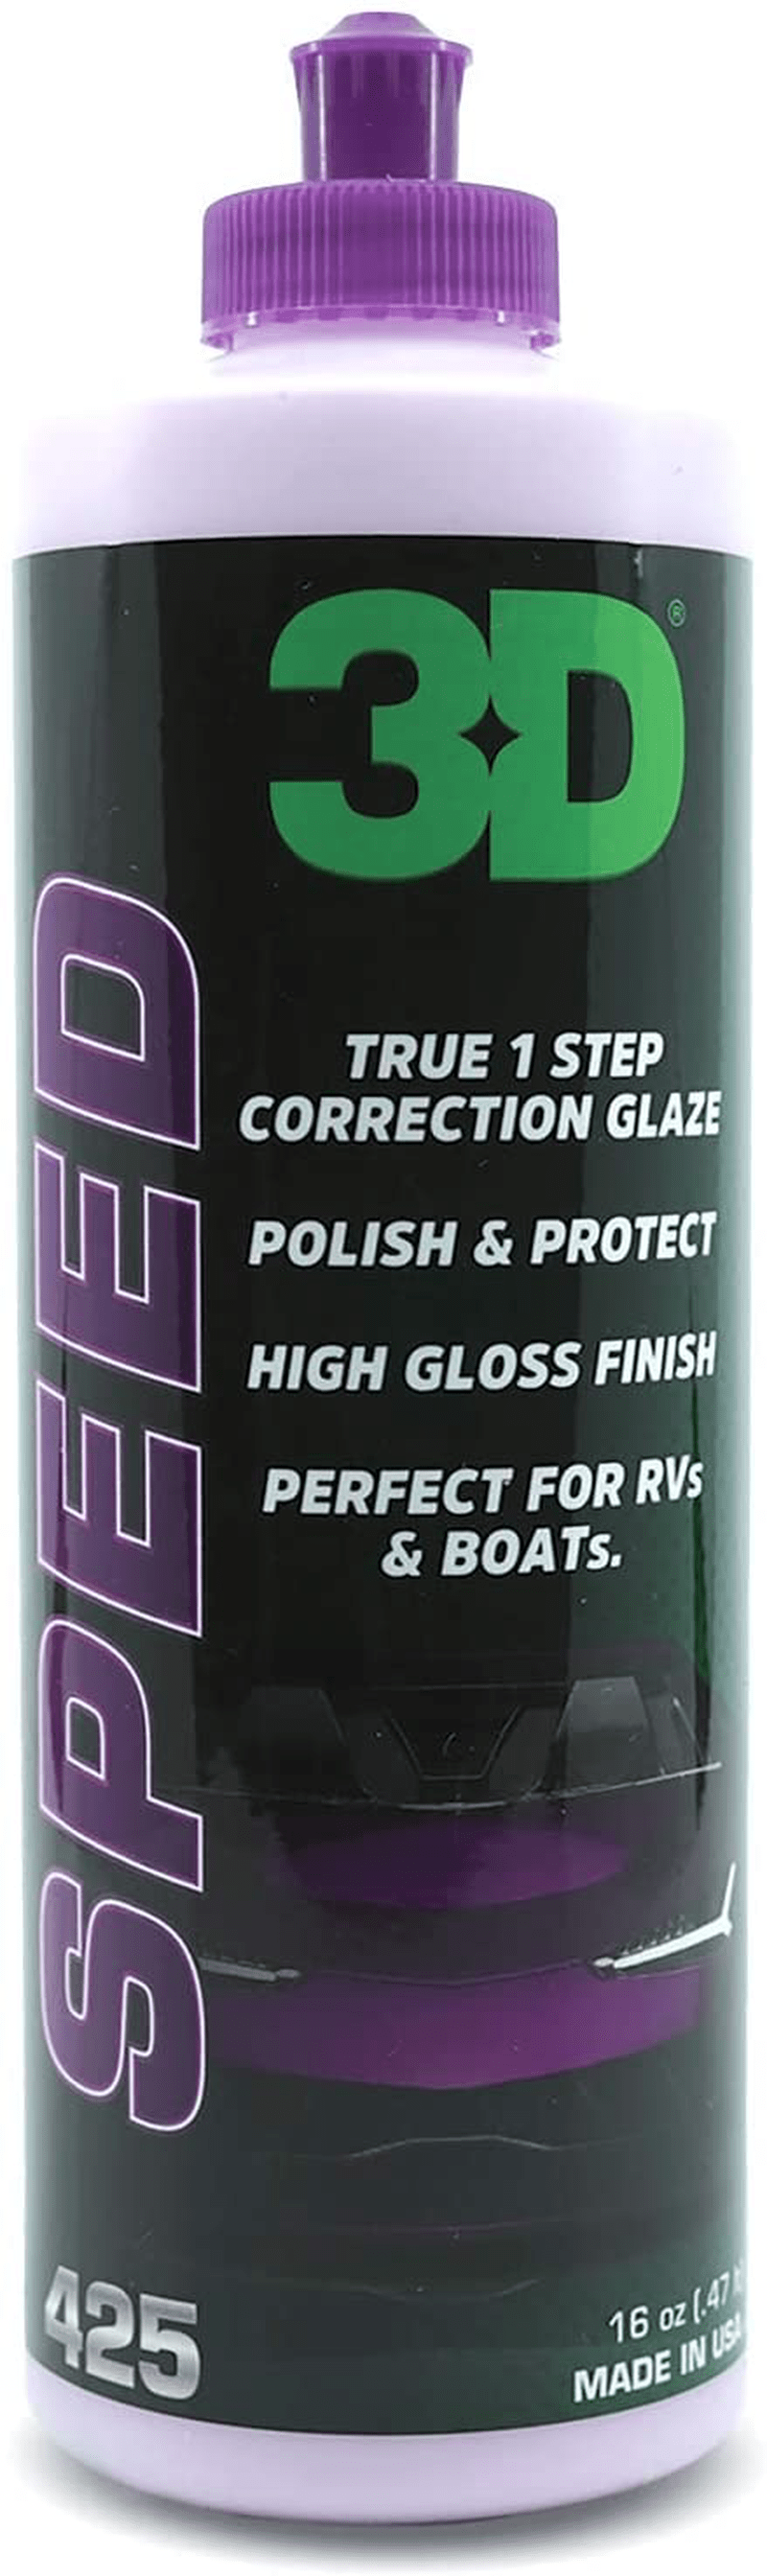 3D Speed Car Polish & Wax – 16oz – All-In-One Scratch Remover & Swirl Correction with Wax Protection Vehicles & Parts > Vehicle Parts & Accessories > Vehicle Maintenance, Care & Decor > Vehicle Paint 3D 16 oz.  